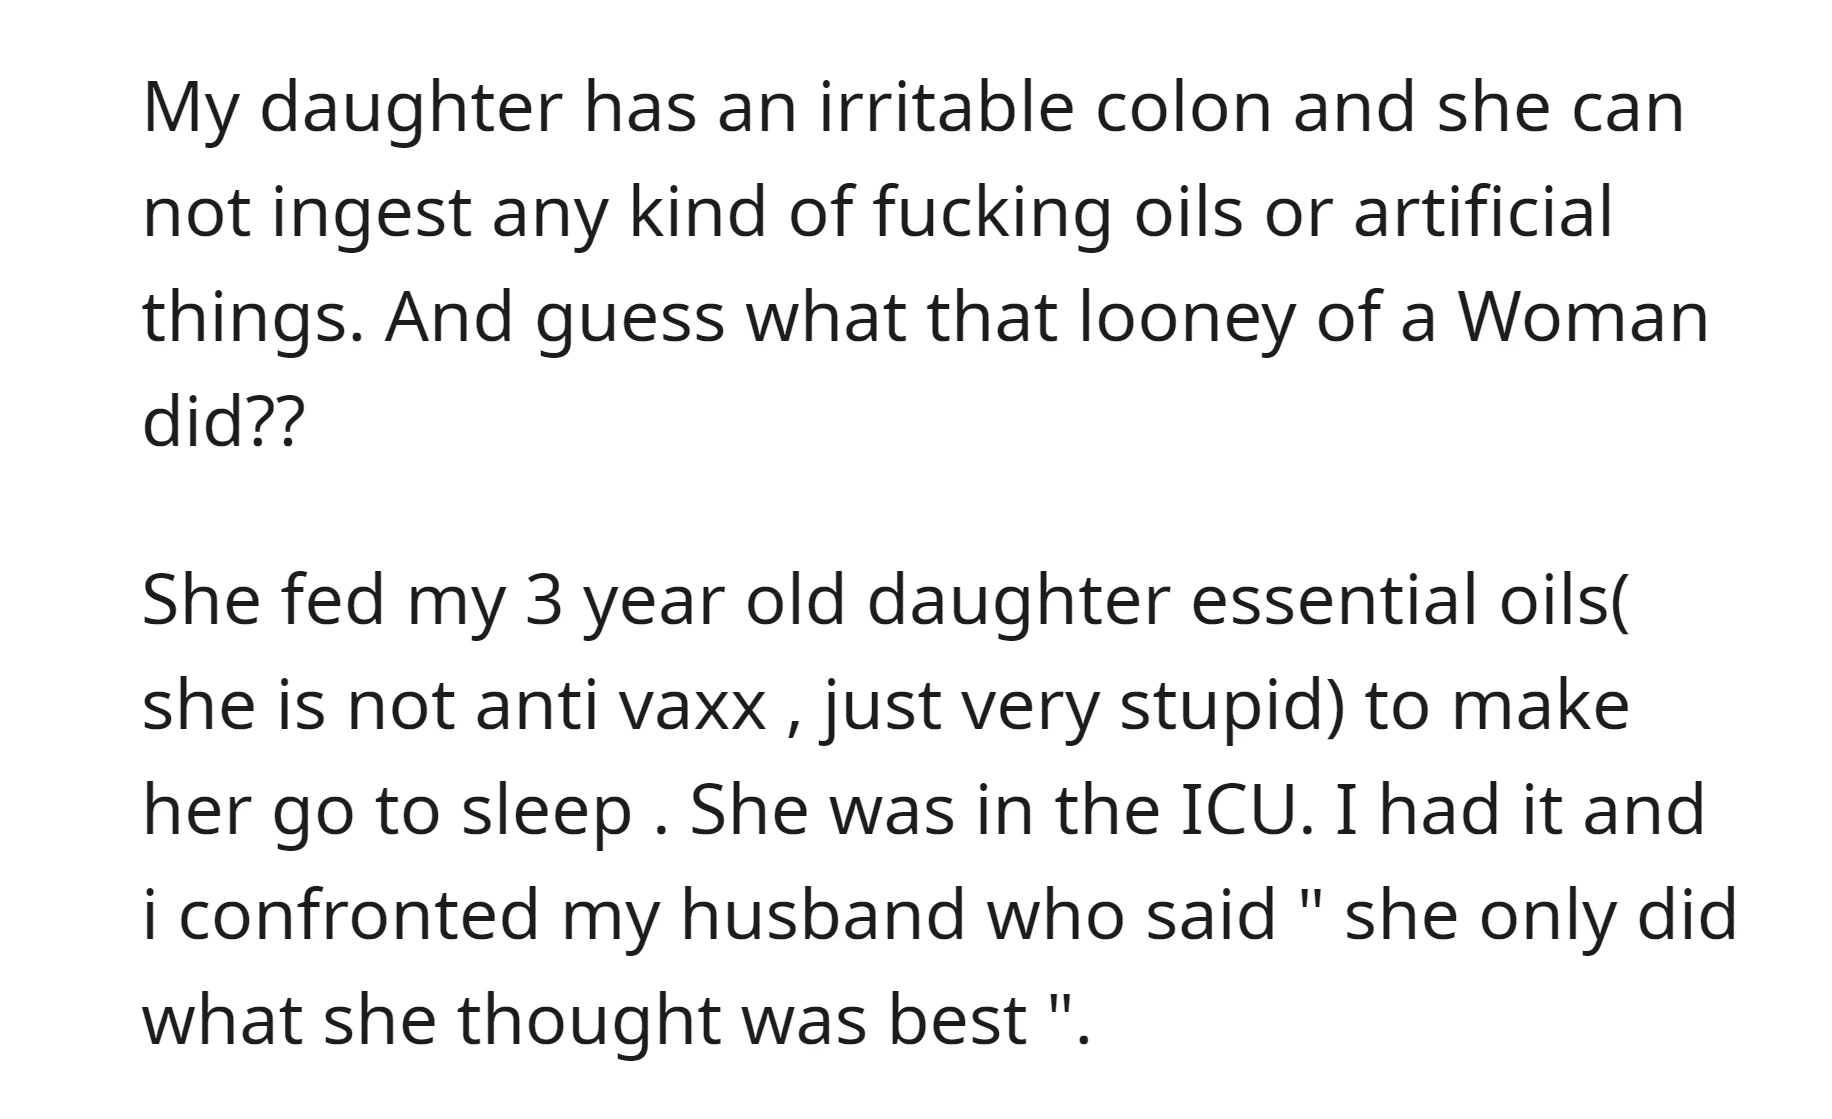 OP's MIL fed her 3-year-old daughter essential oils